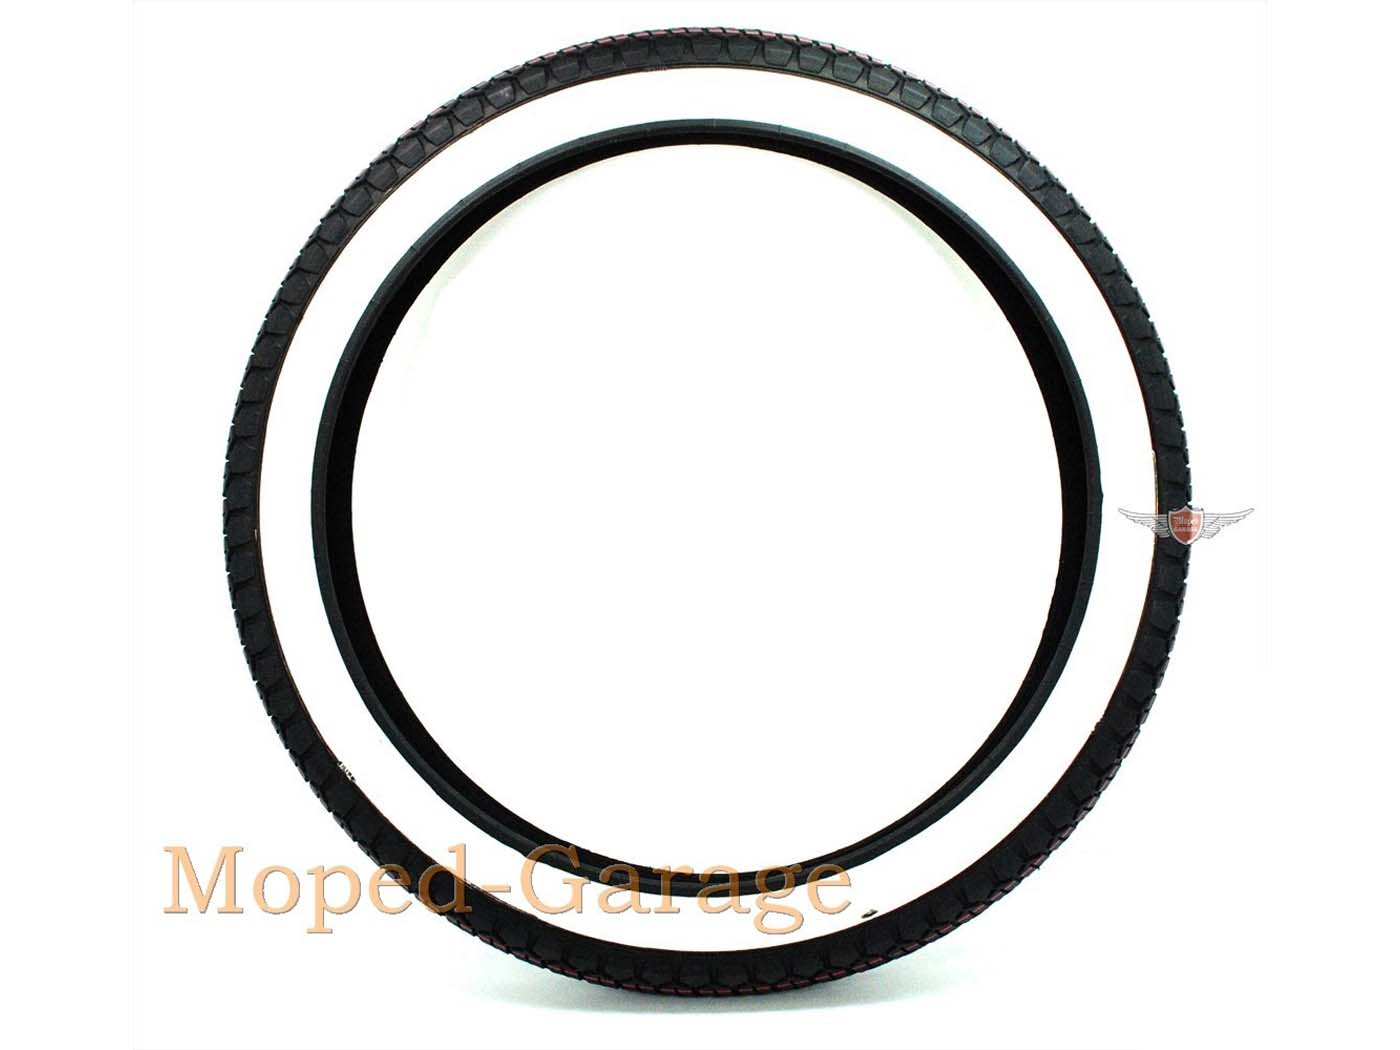 Tires Mitas 2 1/4x 16 Inch Whitewall For Puch Maxi Moped Moped Mokick